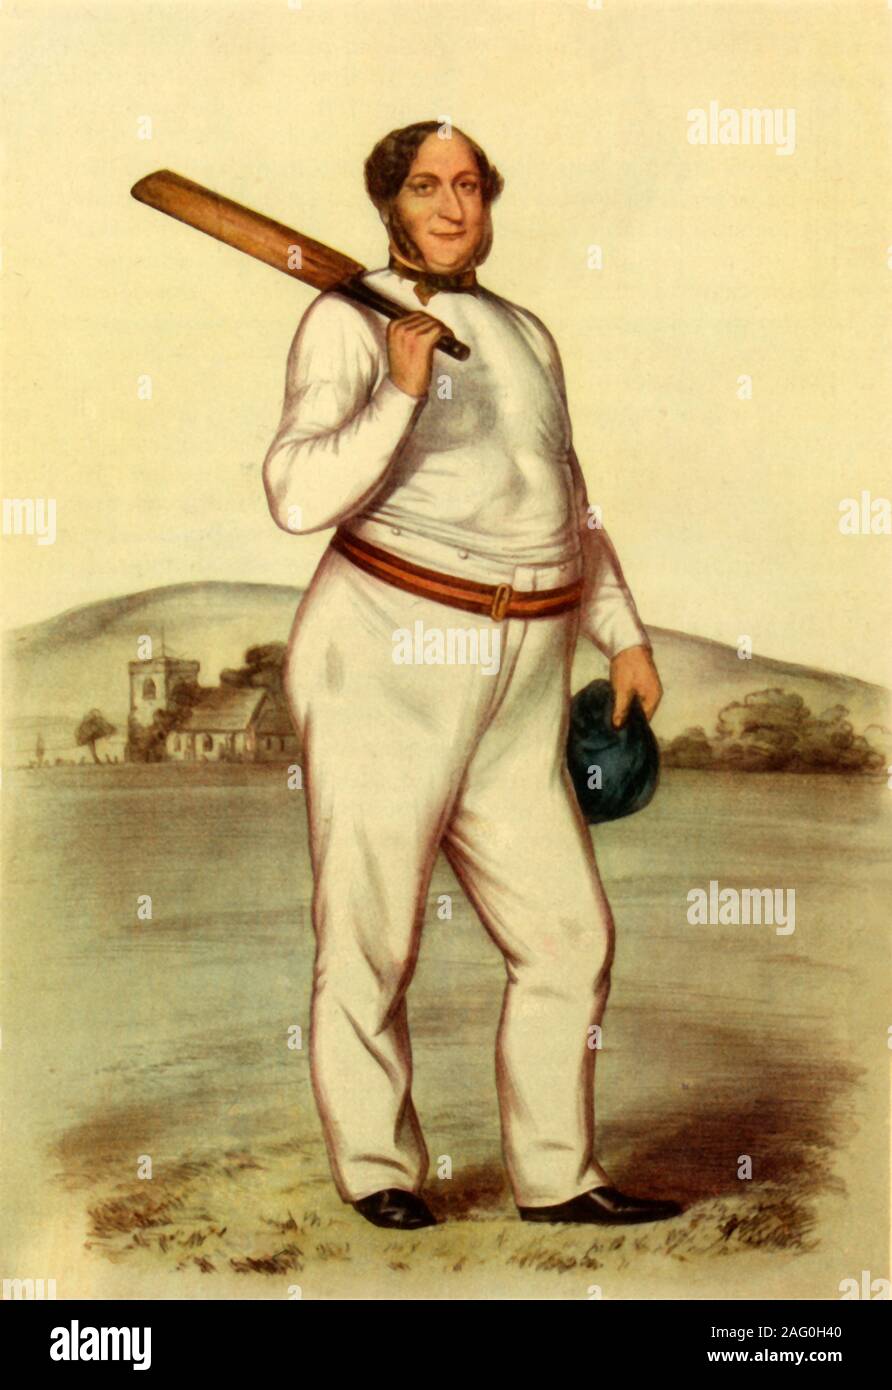 'Alfred Mynn', 1852, (1947). Portrait of English cricketer Alfred Mynn (1807-1861) . From &quot;English Cricket&quot;, by Neville Cardus. [Collins, London, 1947] Stock Photo